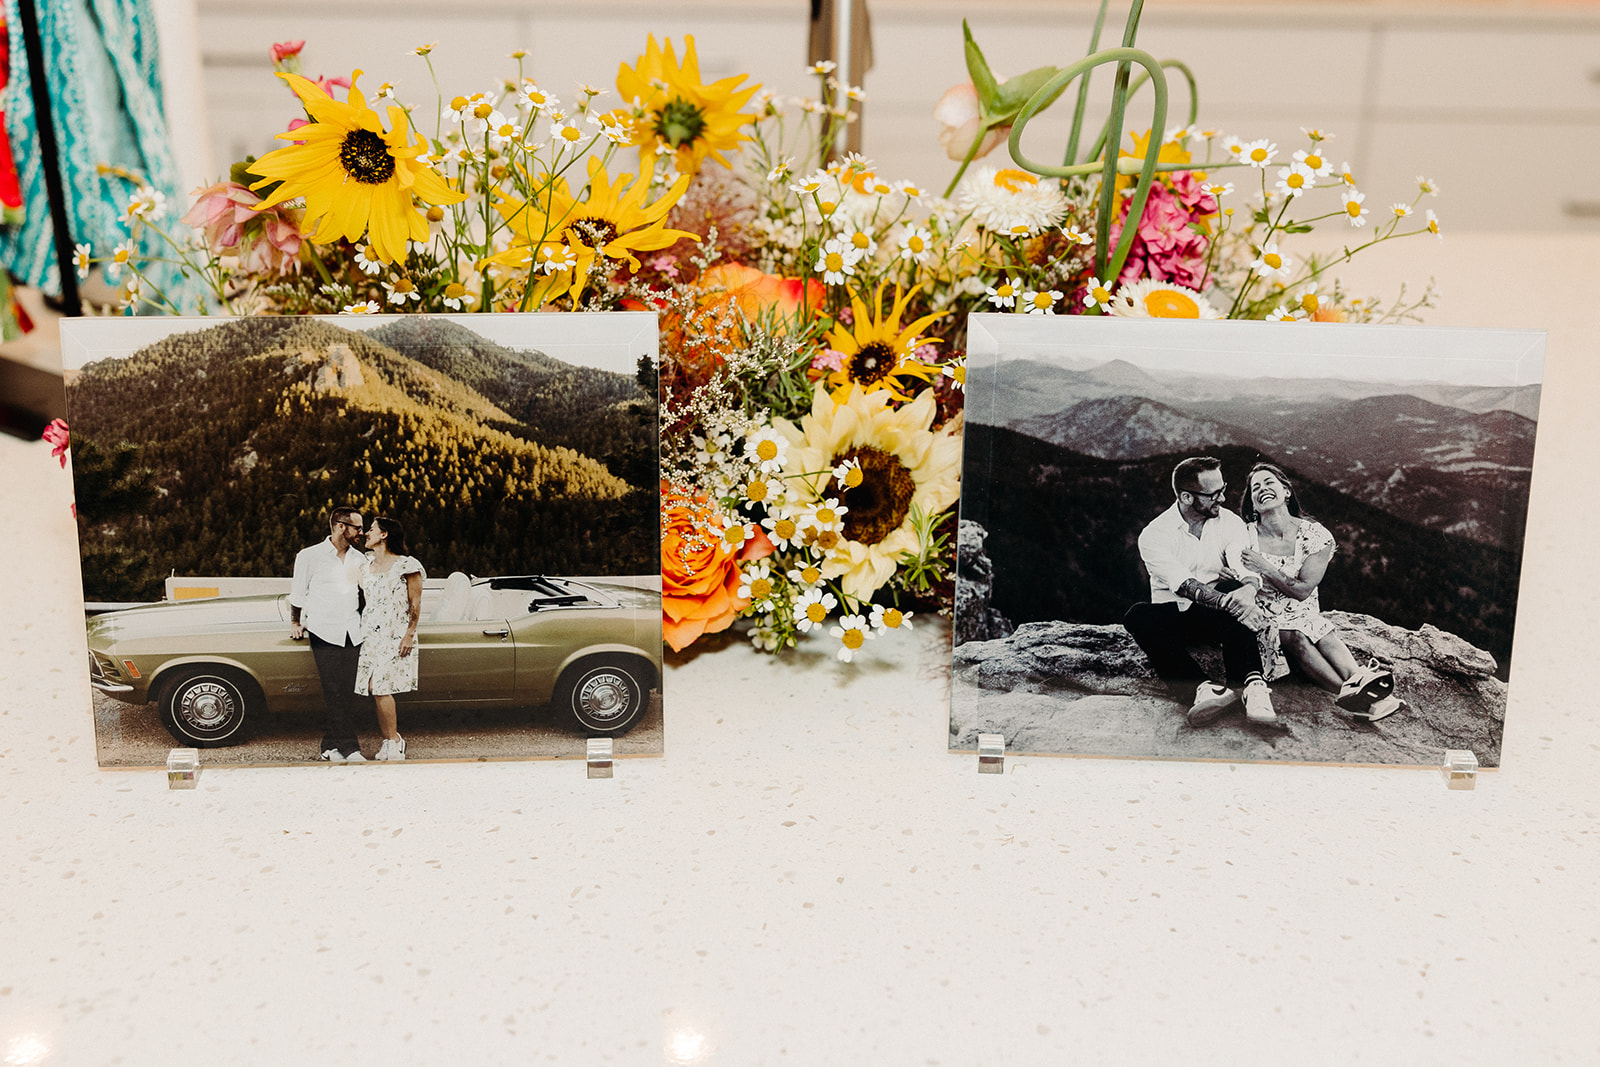 Photos from Rolly and Veronica's elopement photo session with Mat Schramm Photography, on the counter w/ yellow flowers.